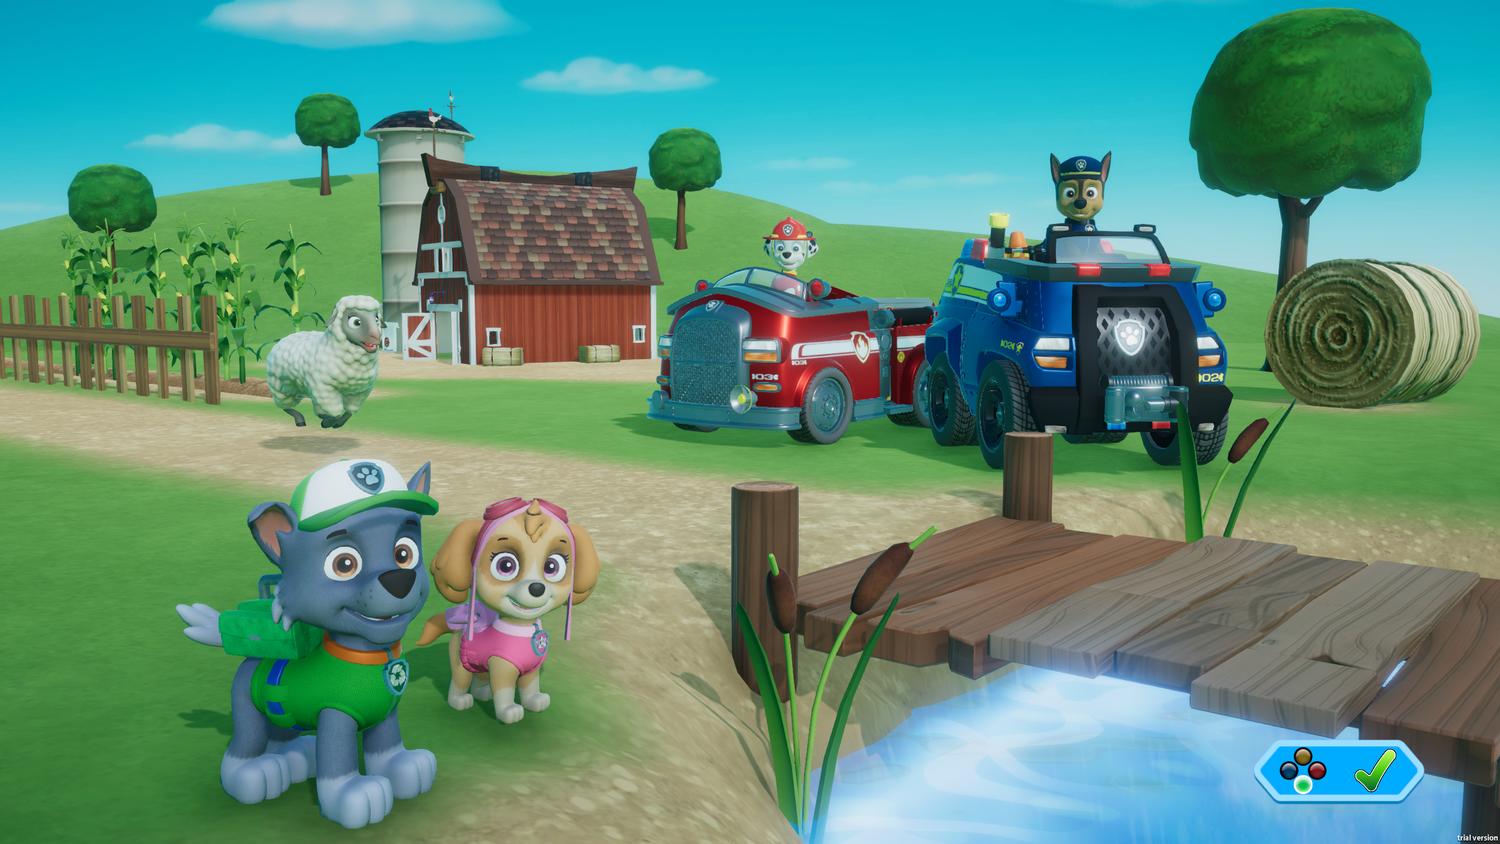 paw patrol on a roll xbox one game